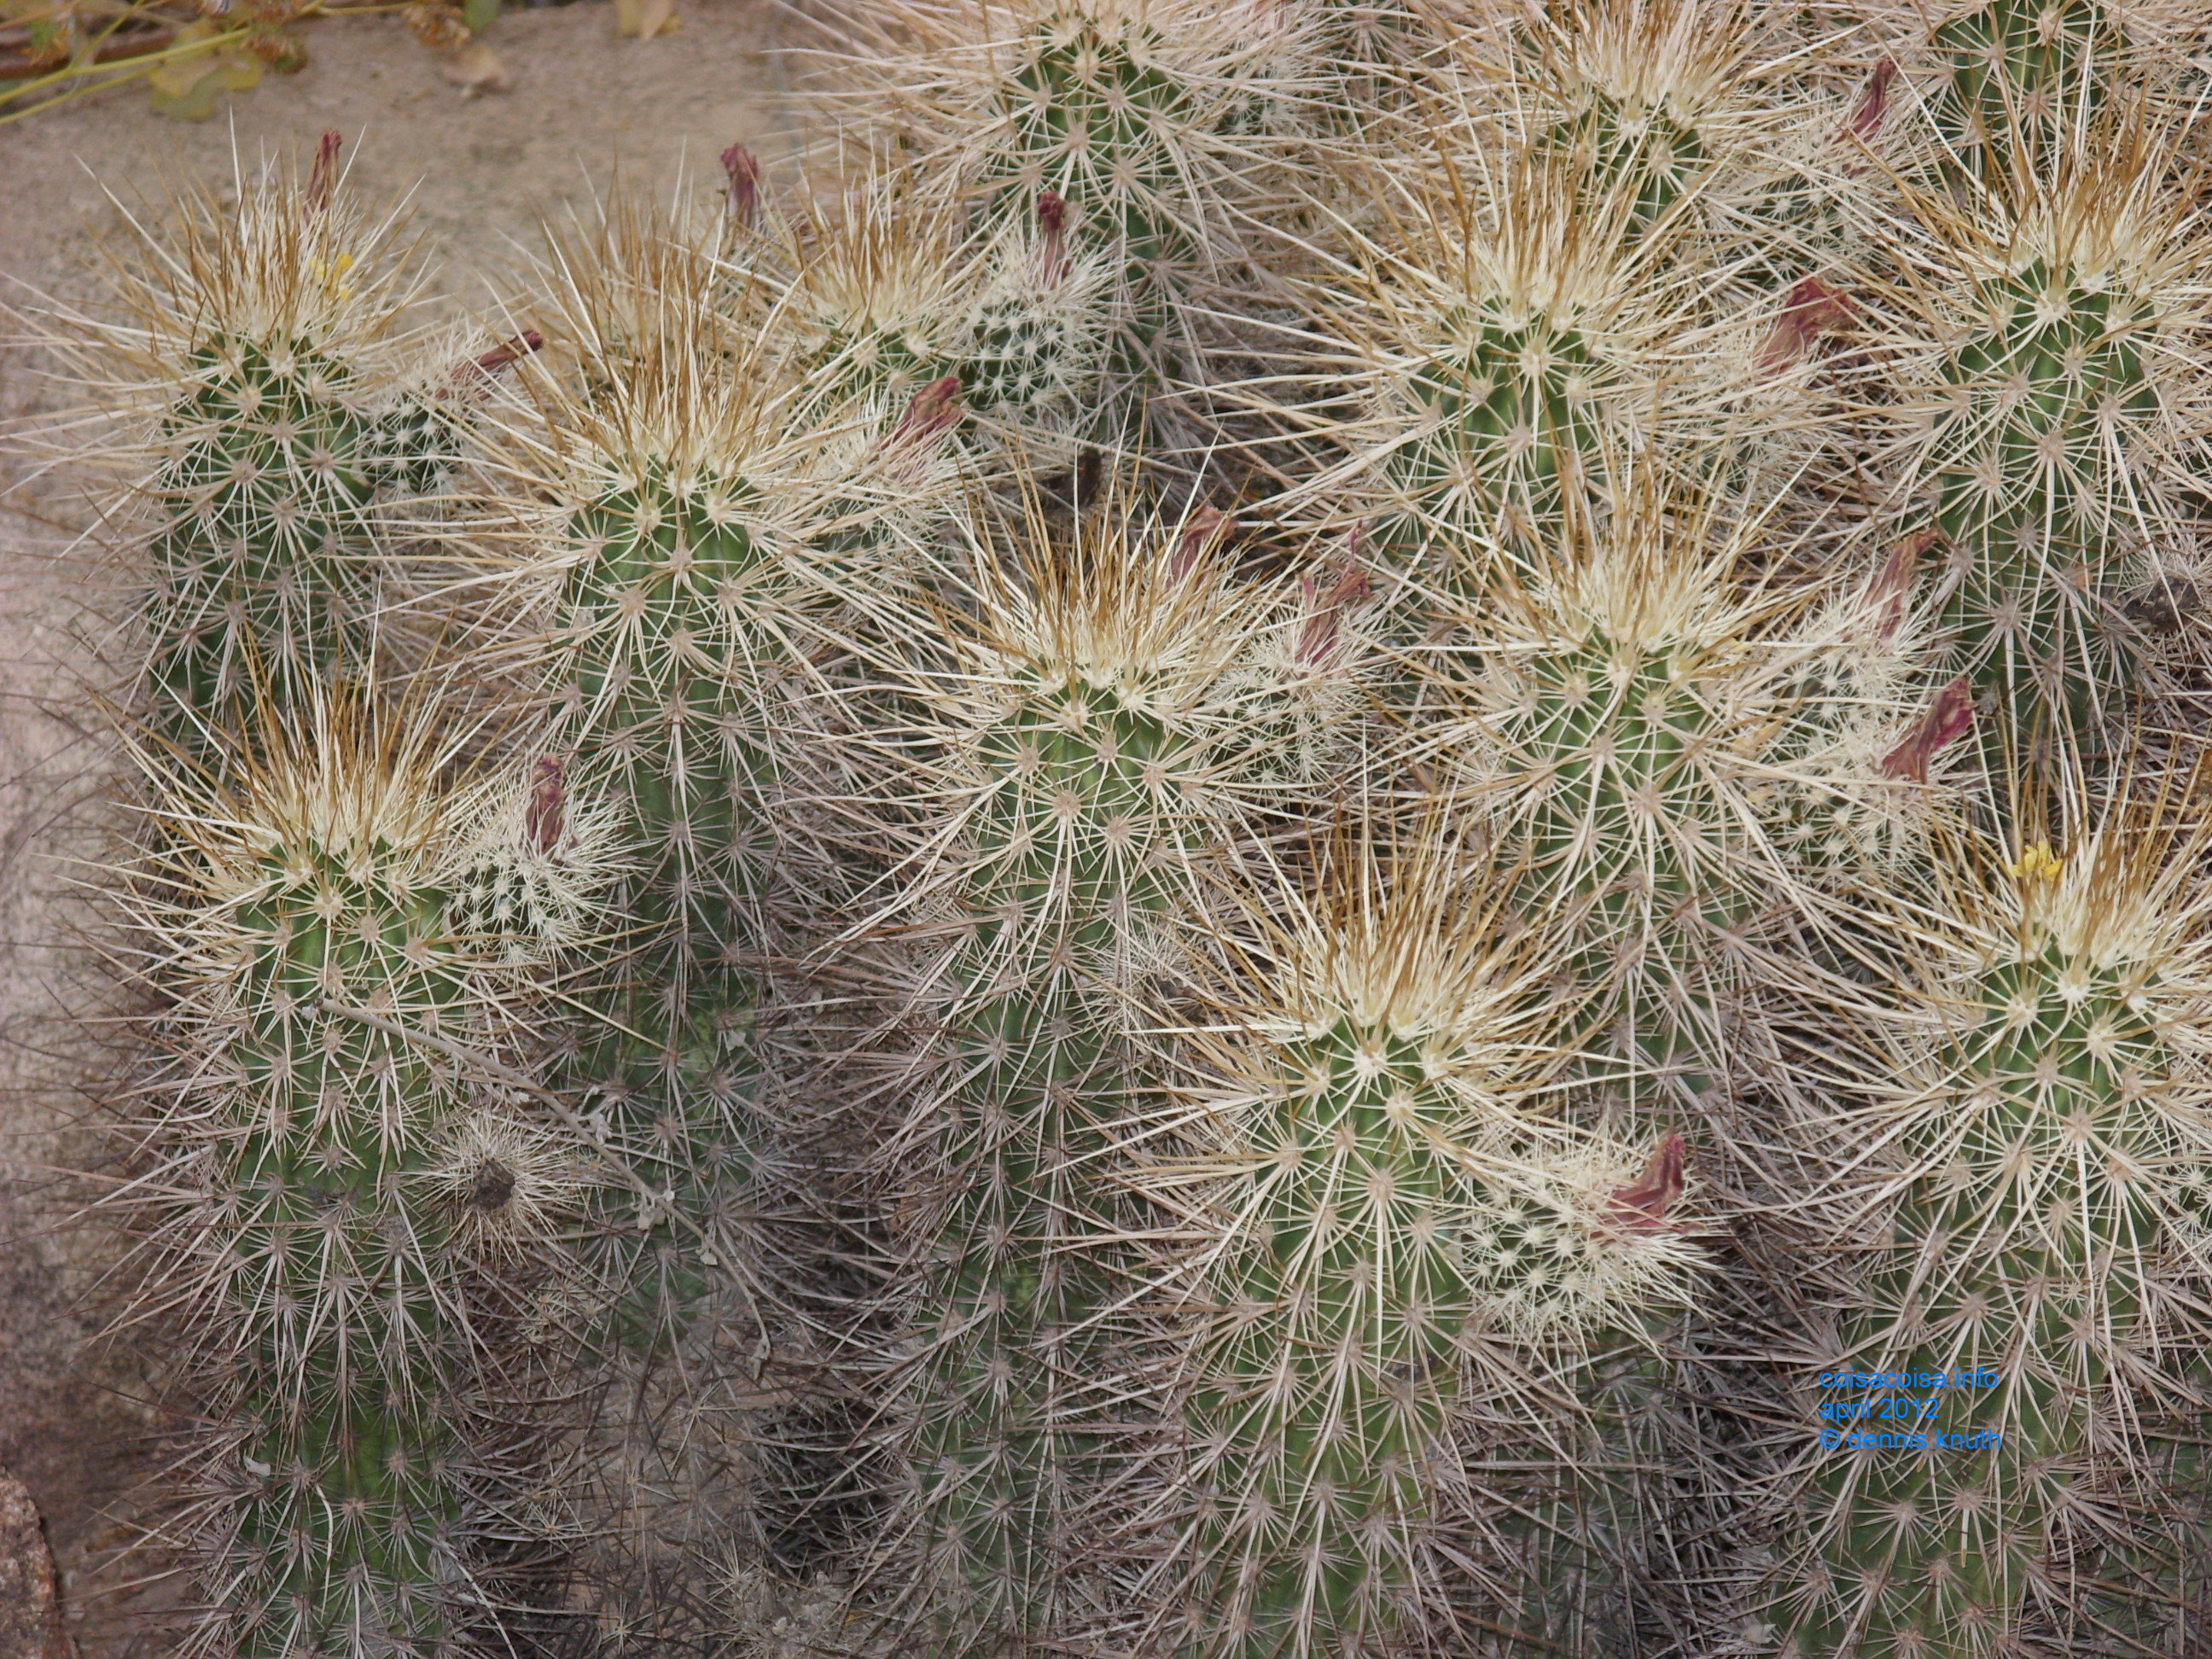 Stand of cacti in Papago Park